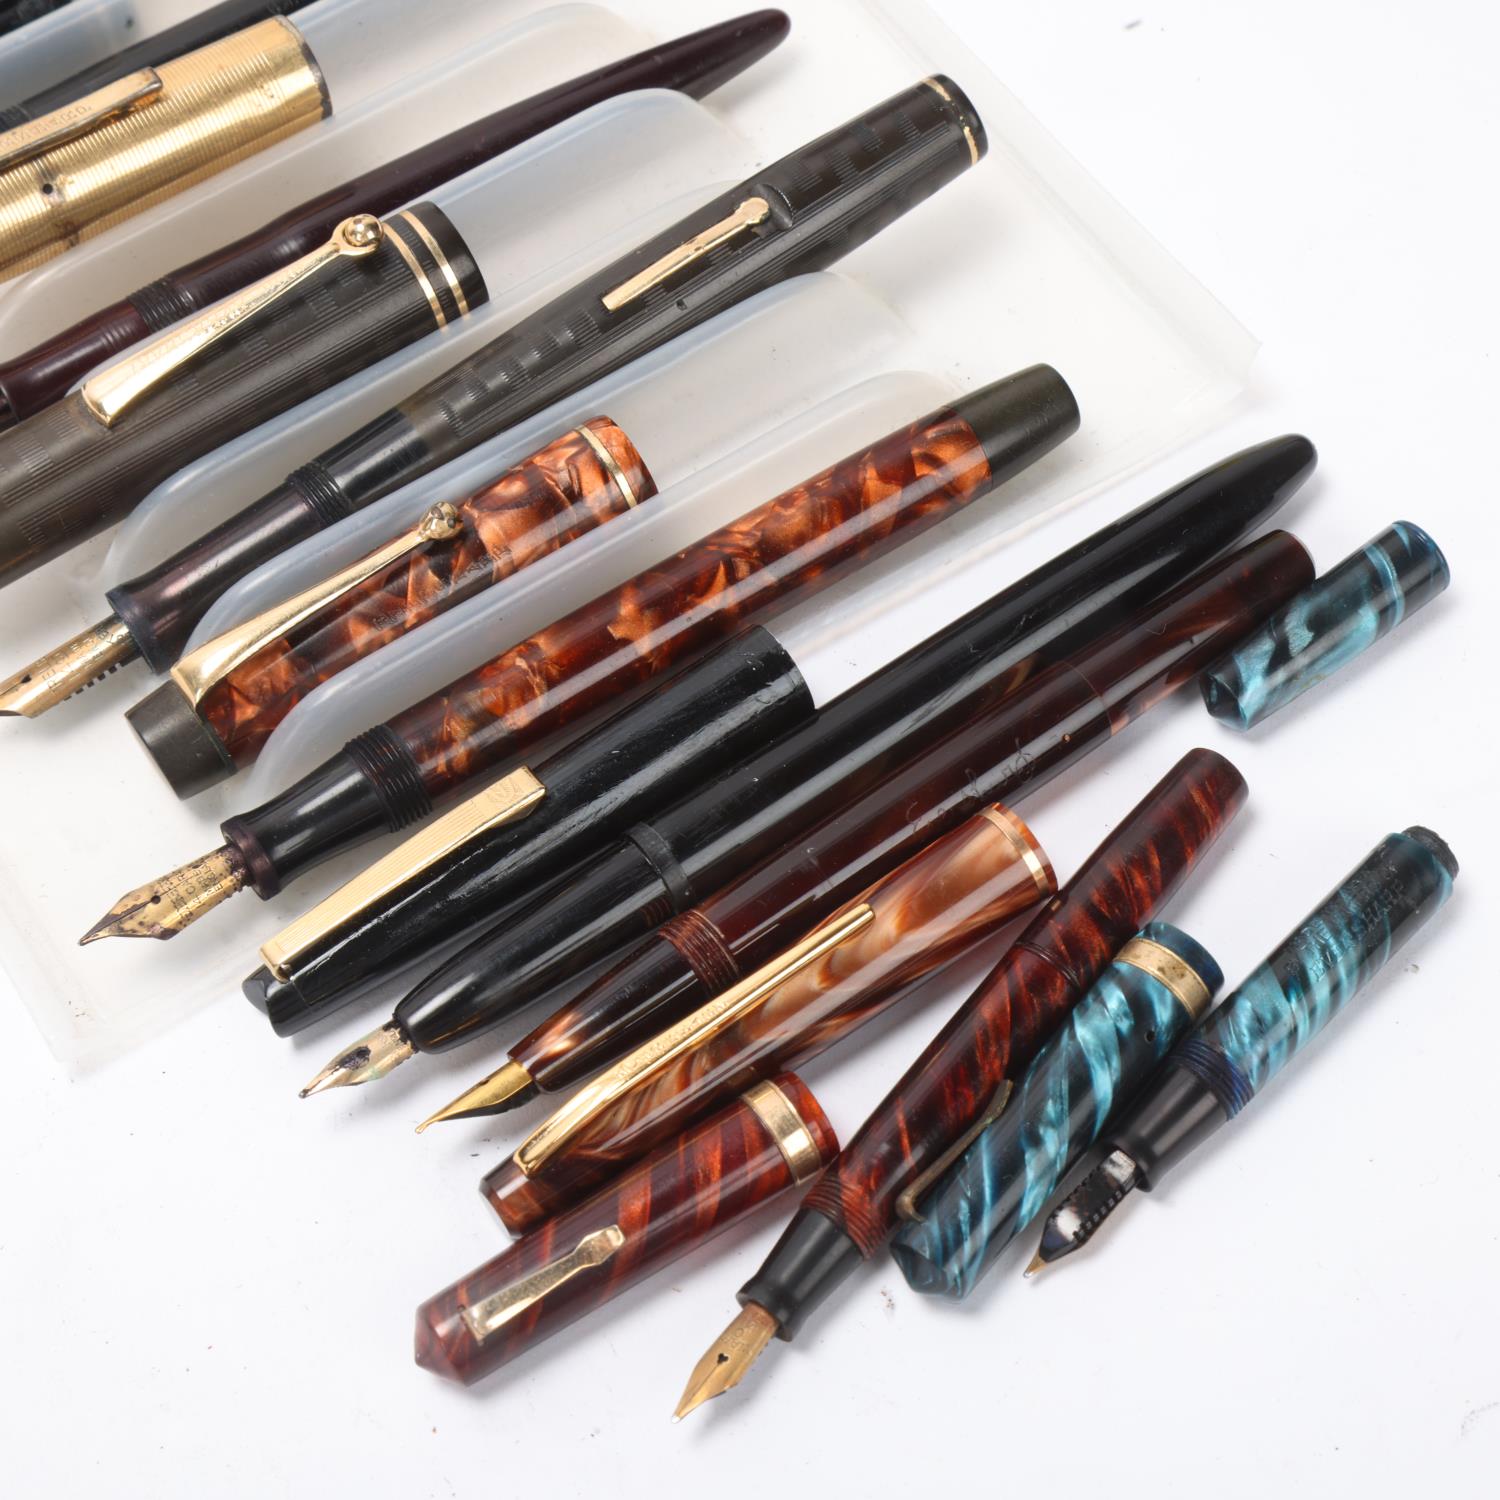 9 vintage Eversharpe / Wahl fountain pens, 1920s' - 60s' models Most in complete untested condition, - Image 2 of 4